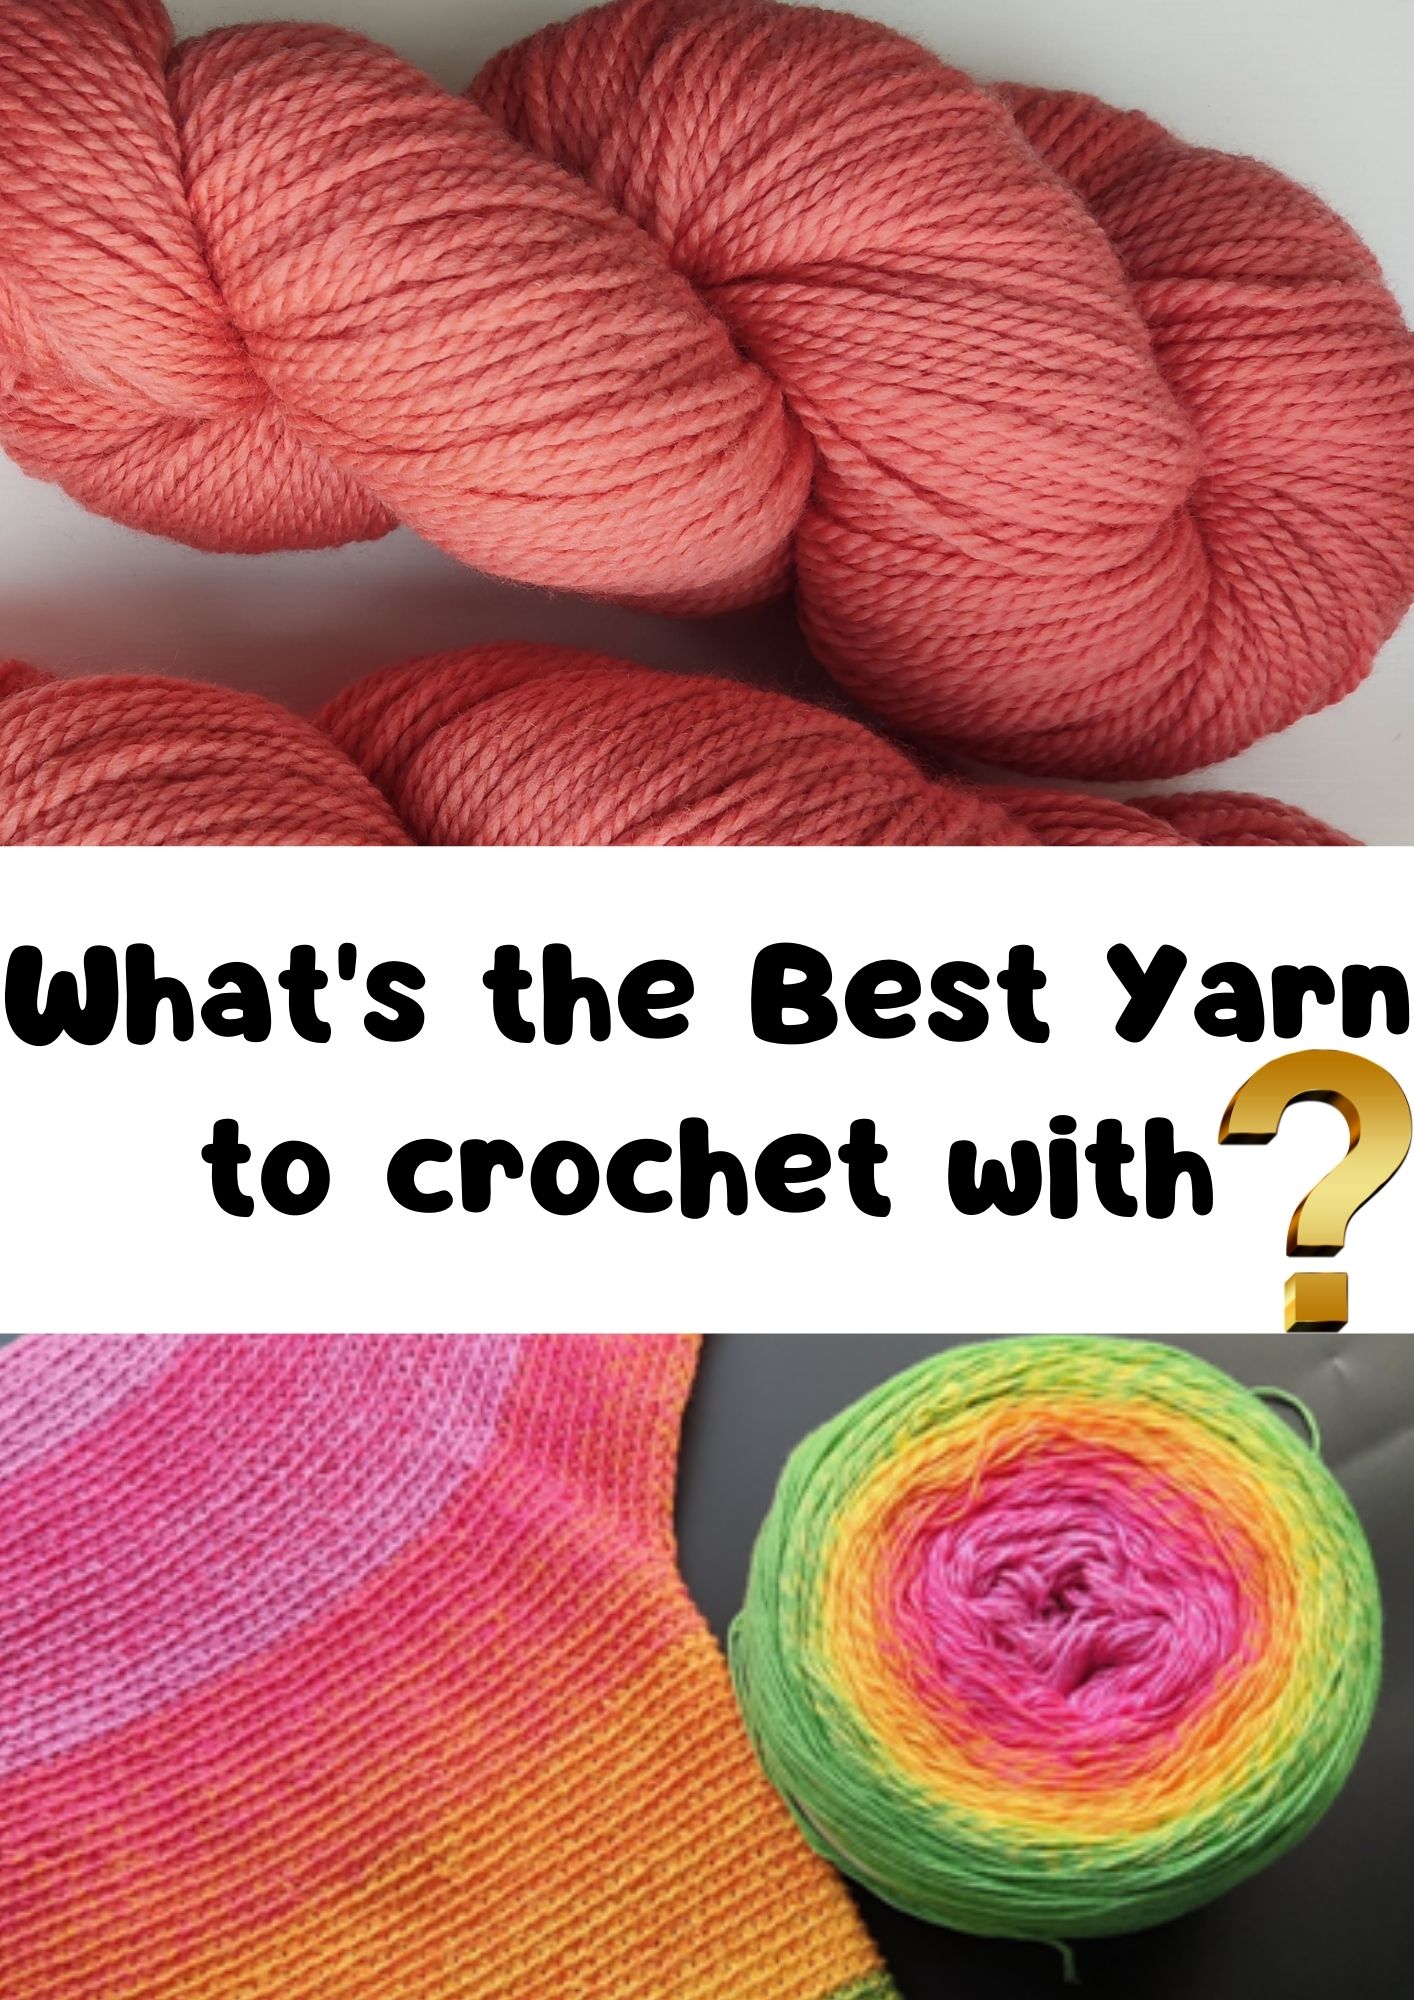 Best yarn to crochet with for a beginner